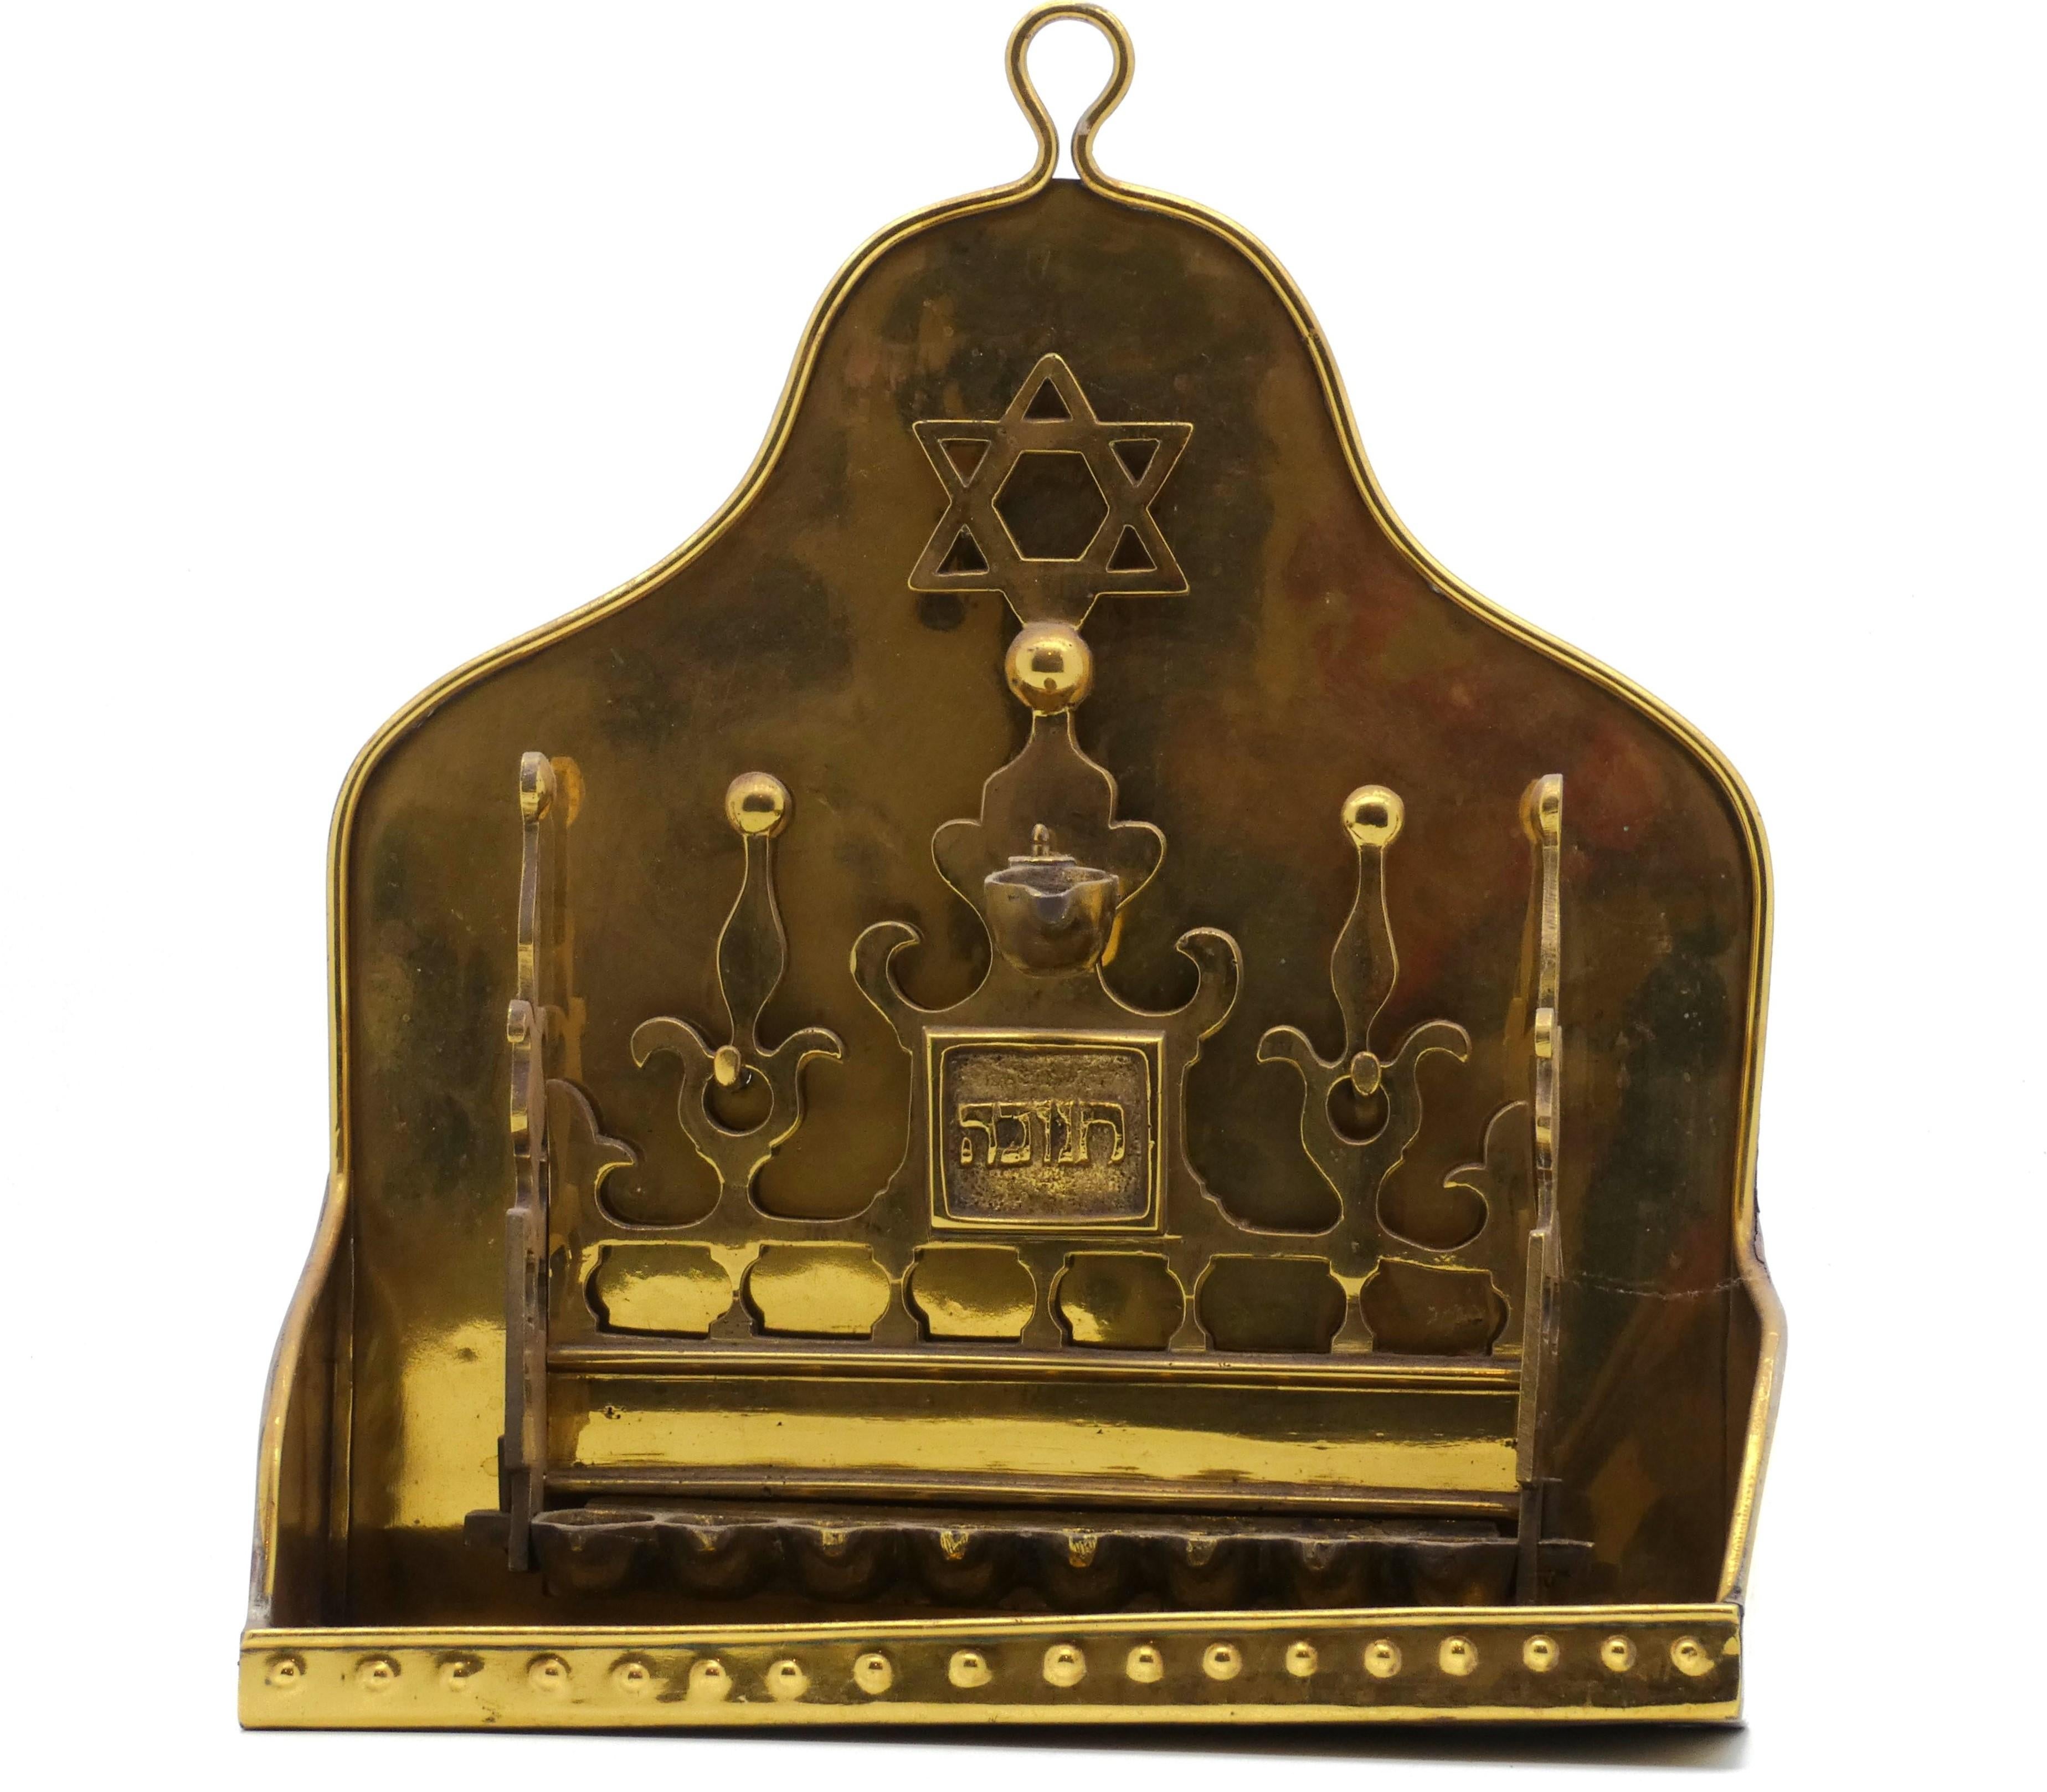 Dutch Brass Hanukkah Lamp, early 20th century made in an 18th-century style.

Hannukah Lamp has two backplates, the fore plate  is pierced with stylized fleurs de lys with ball finials on its upper portion and side panels.

Mounted at top of the